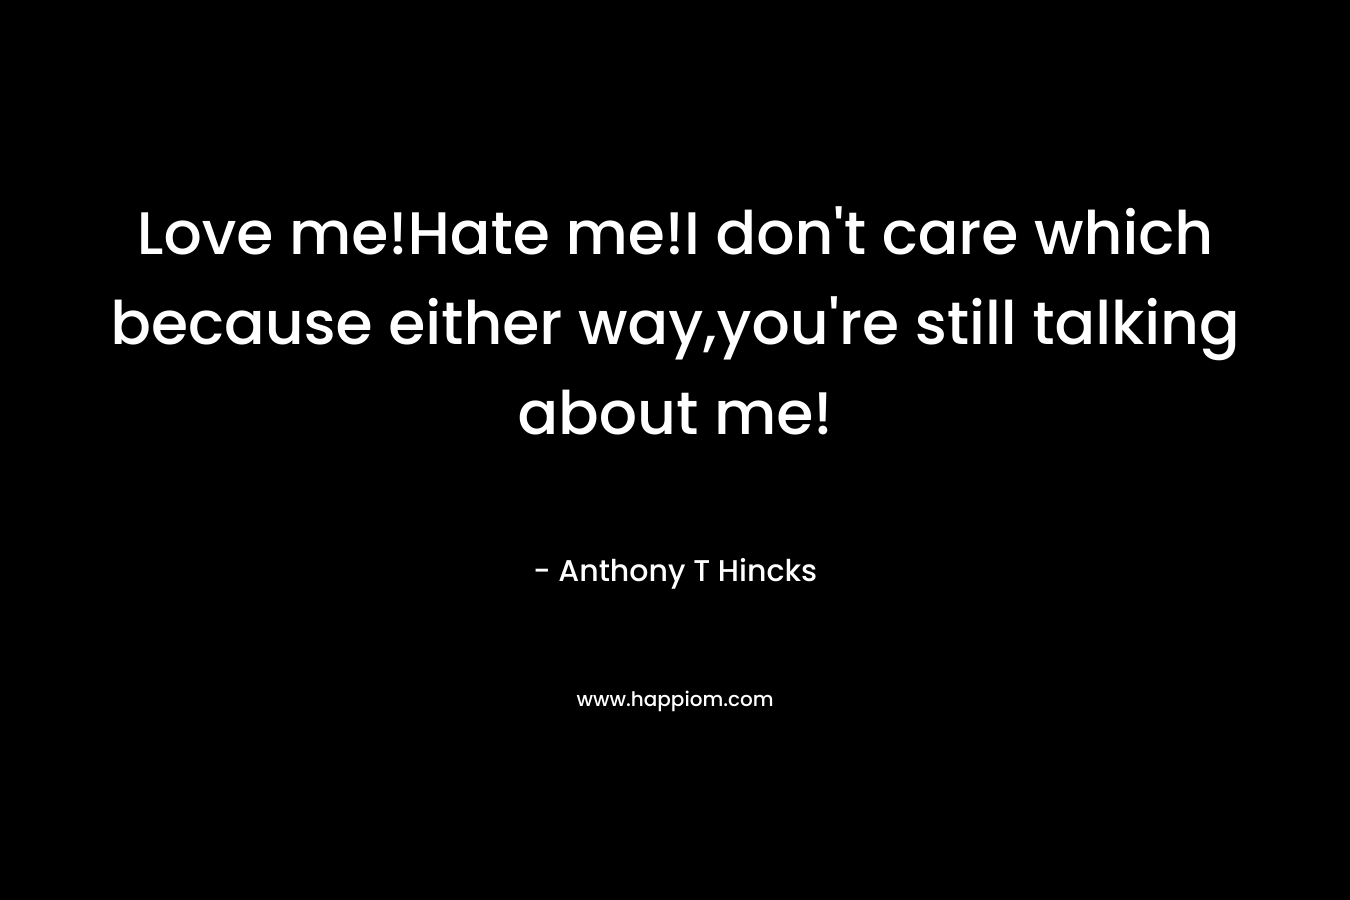 Love me!Hate me!I don’t care which because either way,you’re still talking about me! – Anthony T Hincks